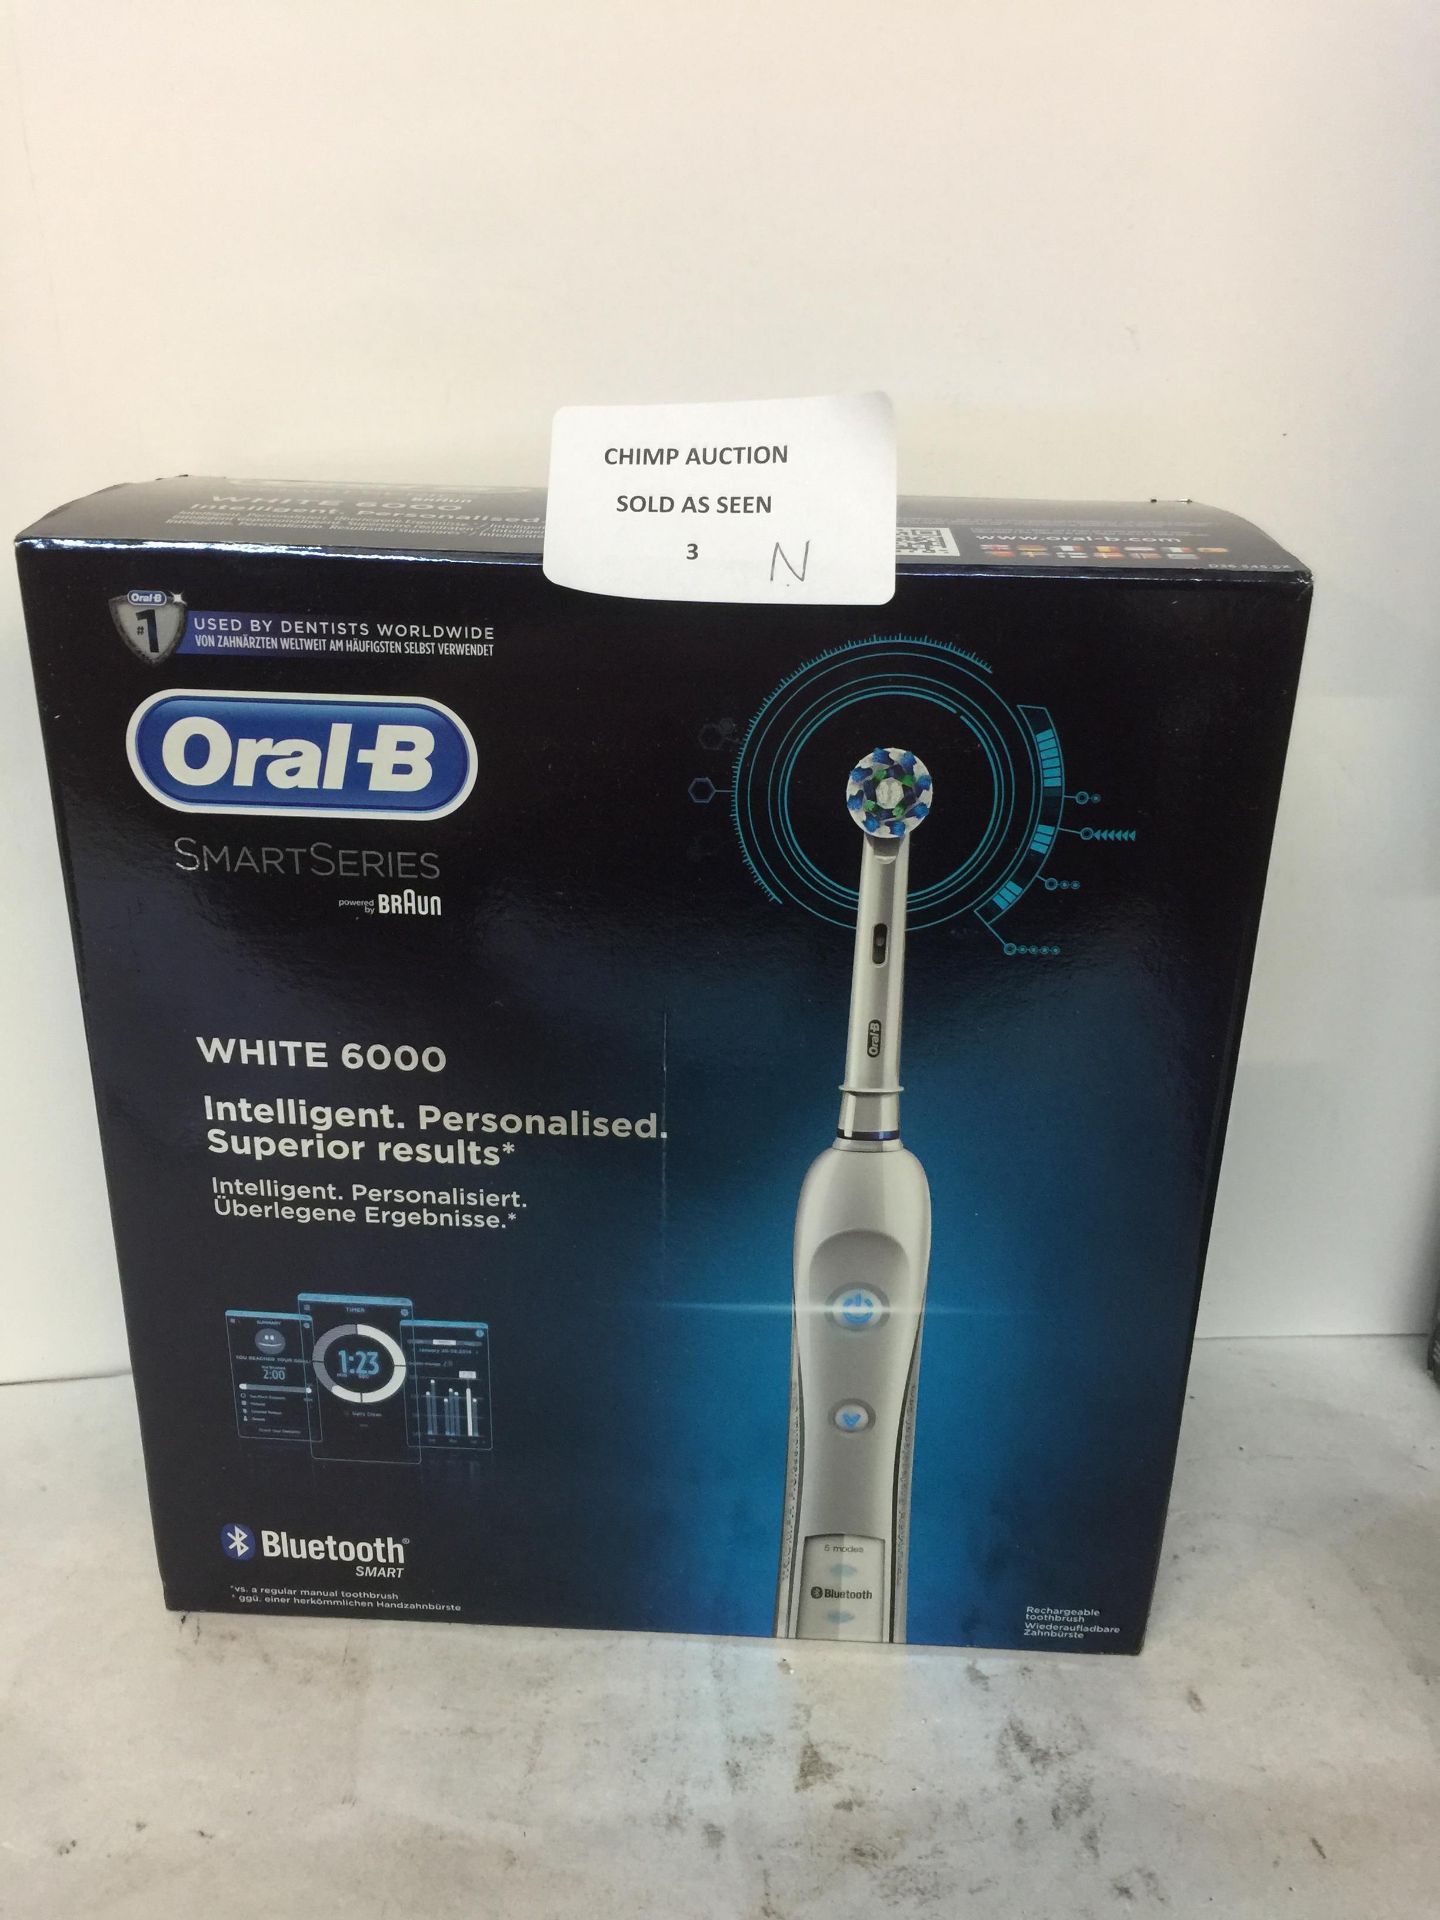 BRAND NEW Oral-B Smart Series 6000 CrossAction BLUETOOTH Toothbrush RRP £229.99.